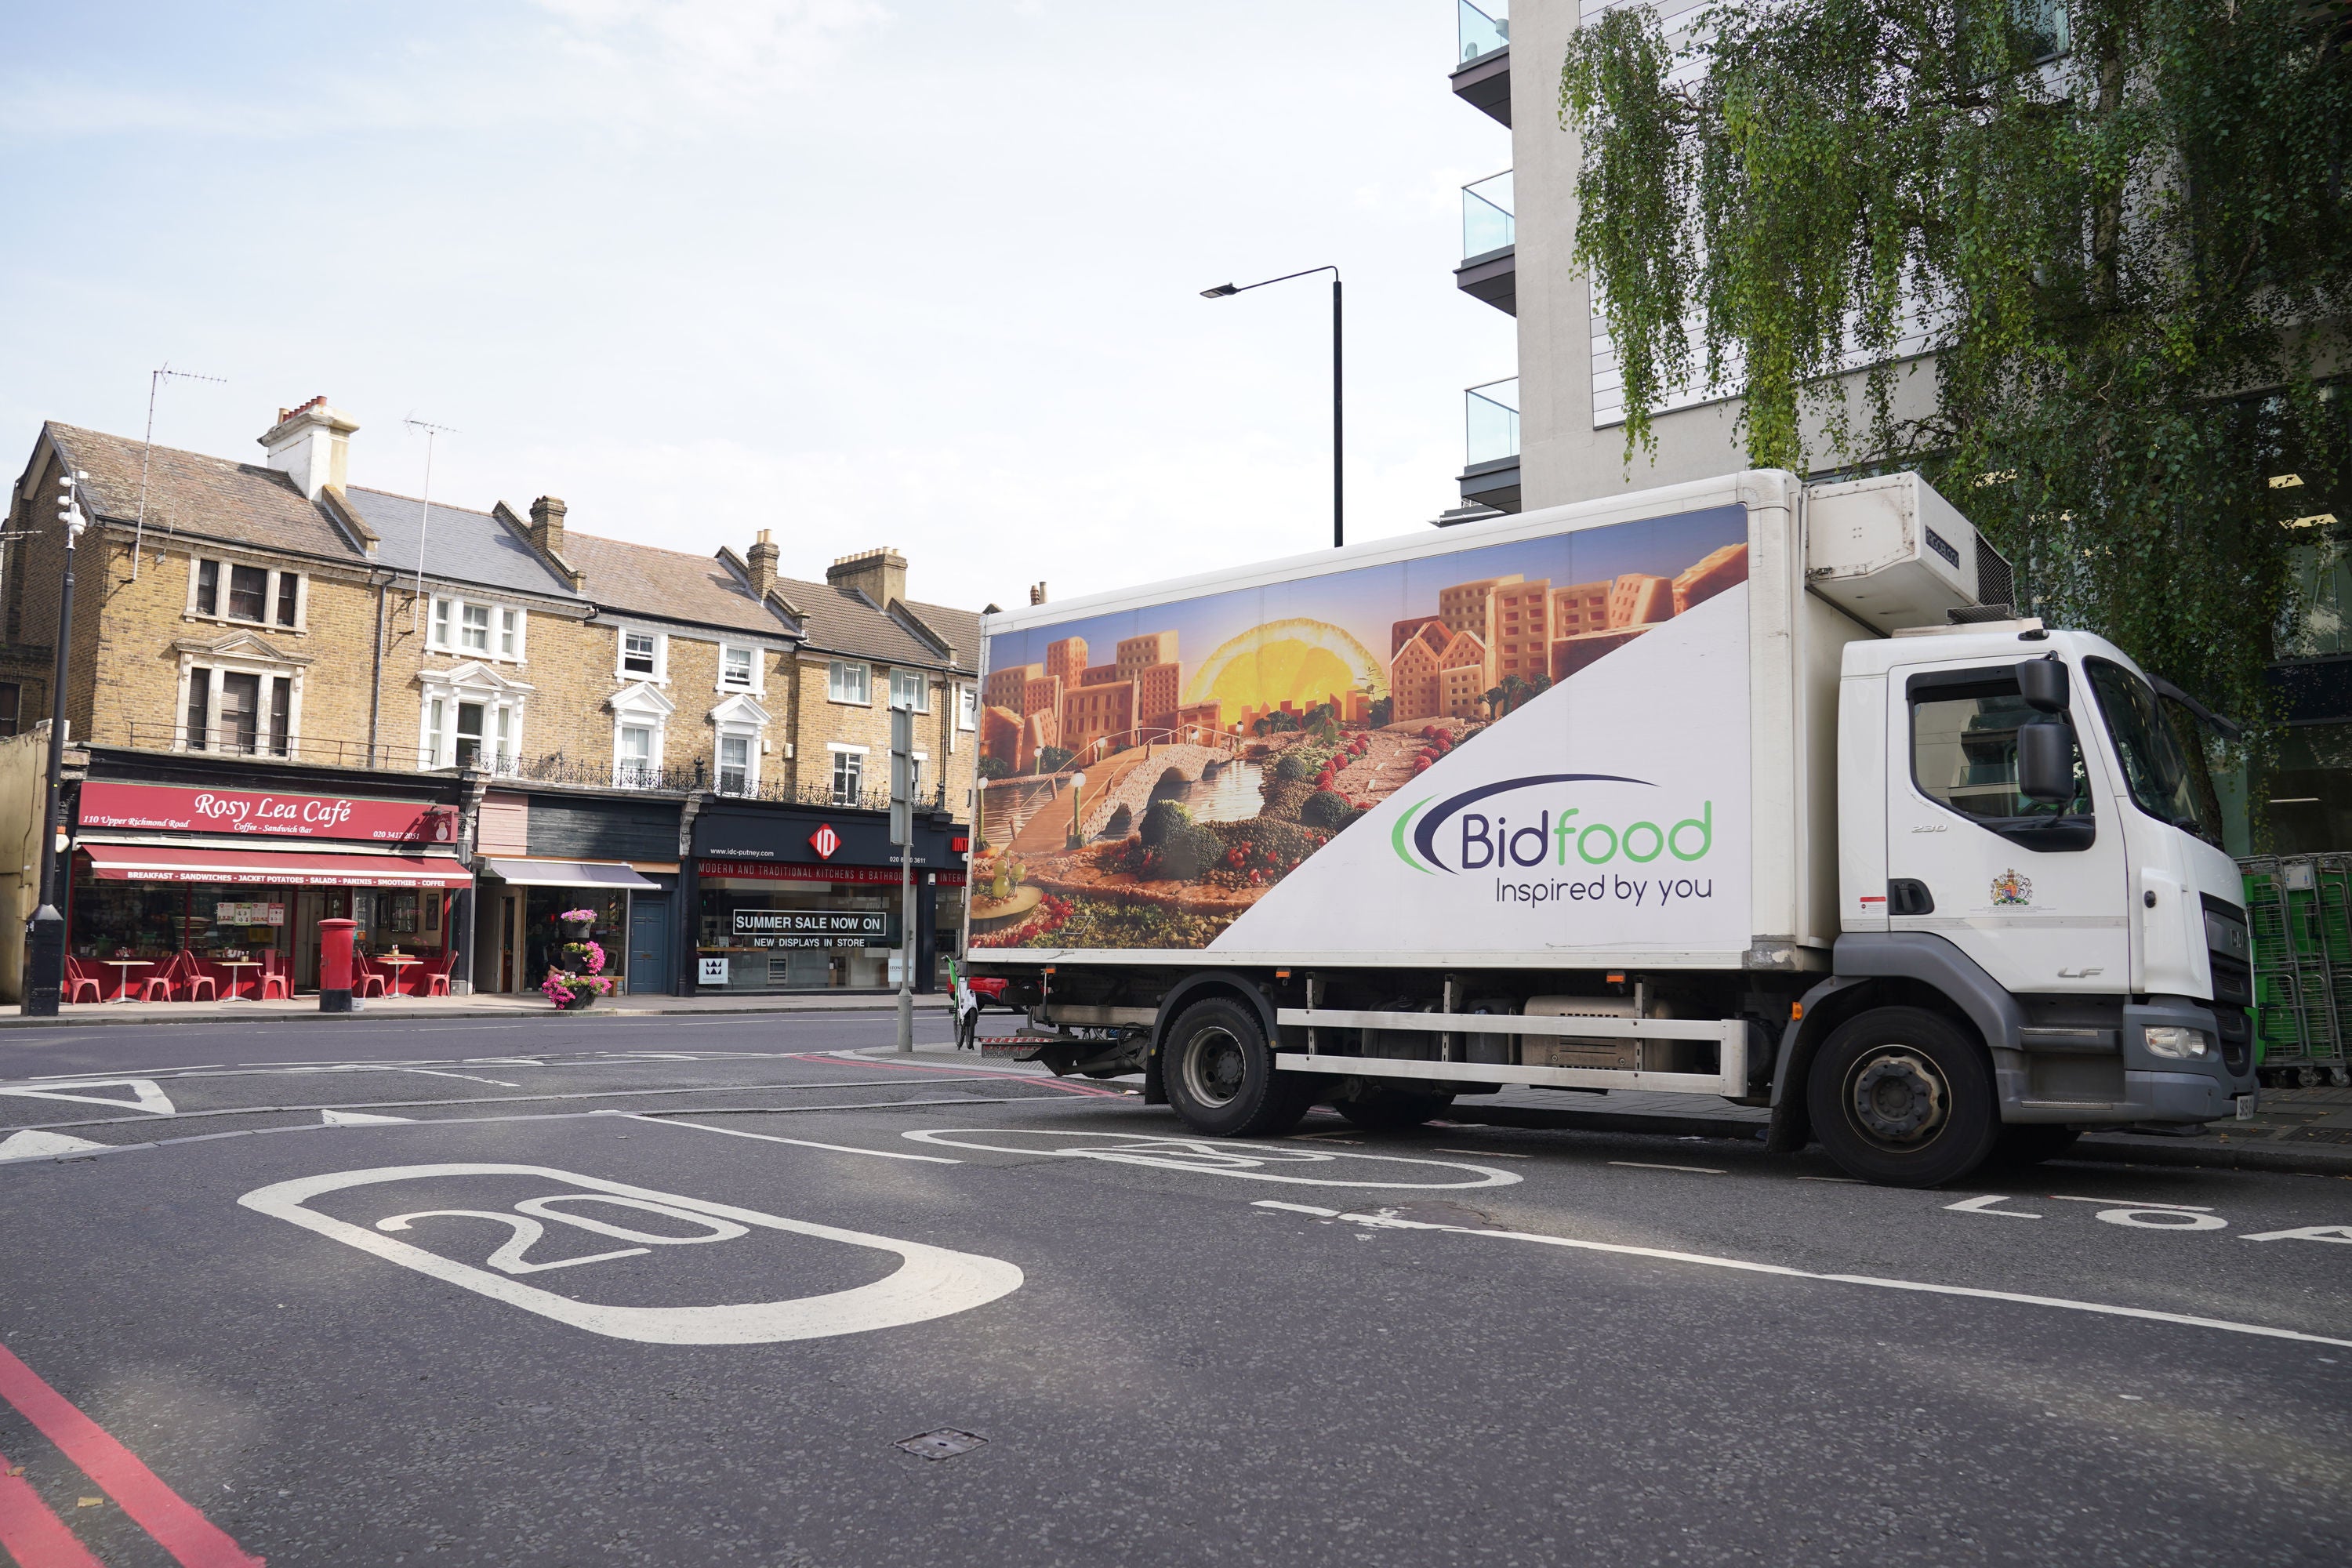 The escapee is believed to have initially fled Wandsworth prison taped to the bottom of a Bidfood truck